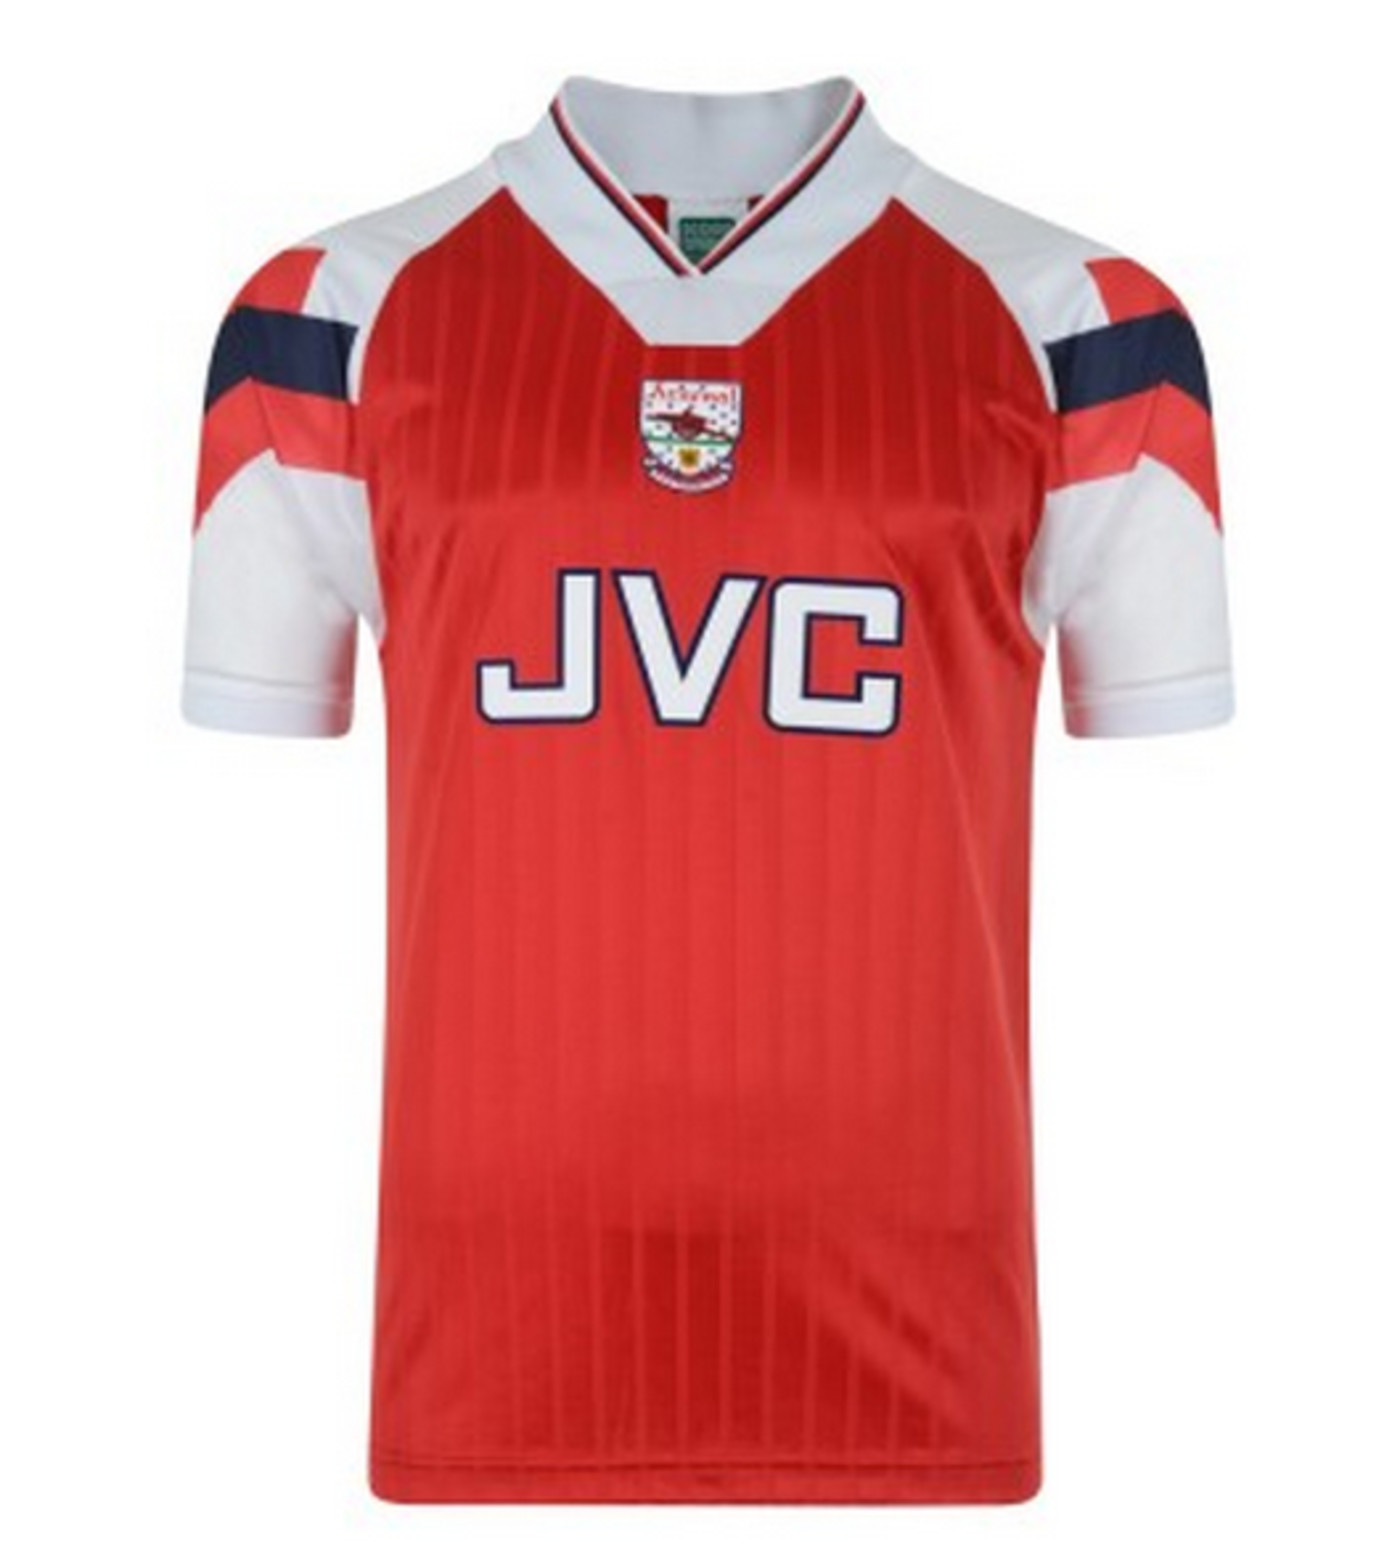 The Best Retro Premier League Shirts You Can Buy Right Now | Complex UK